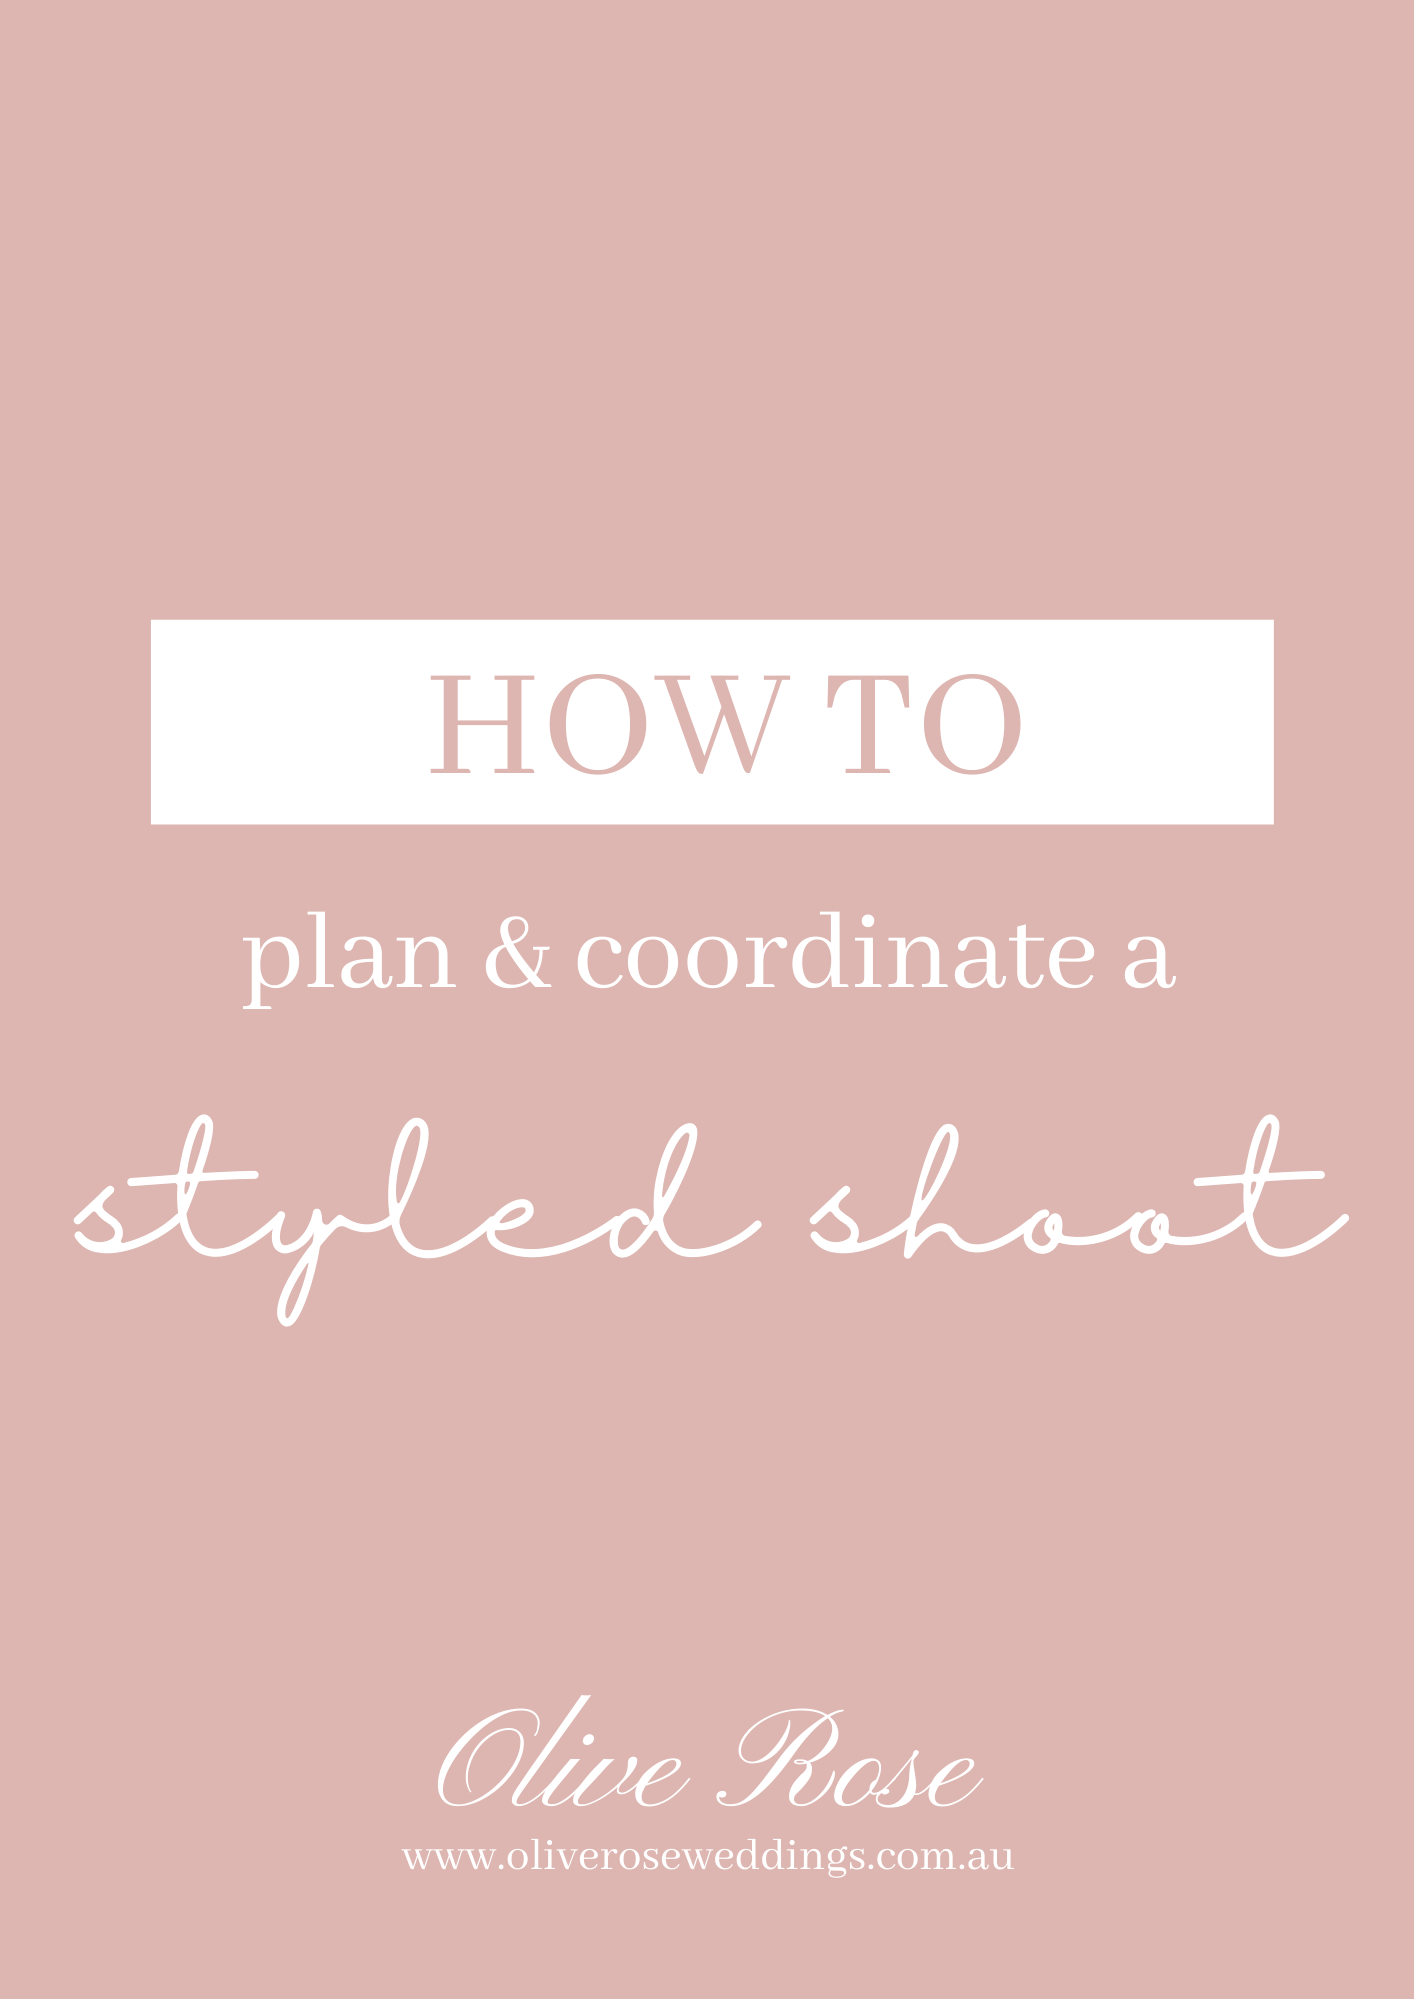 How to plan & coordinate a styled shoot